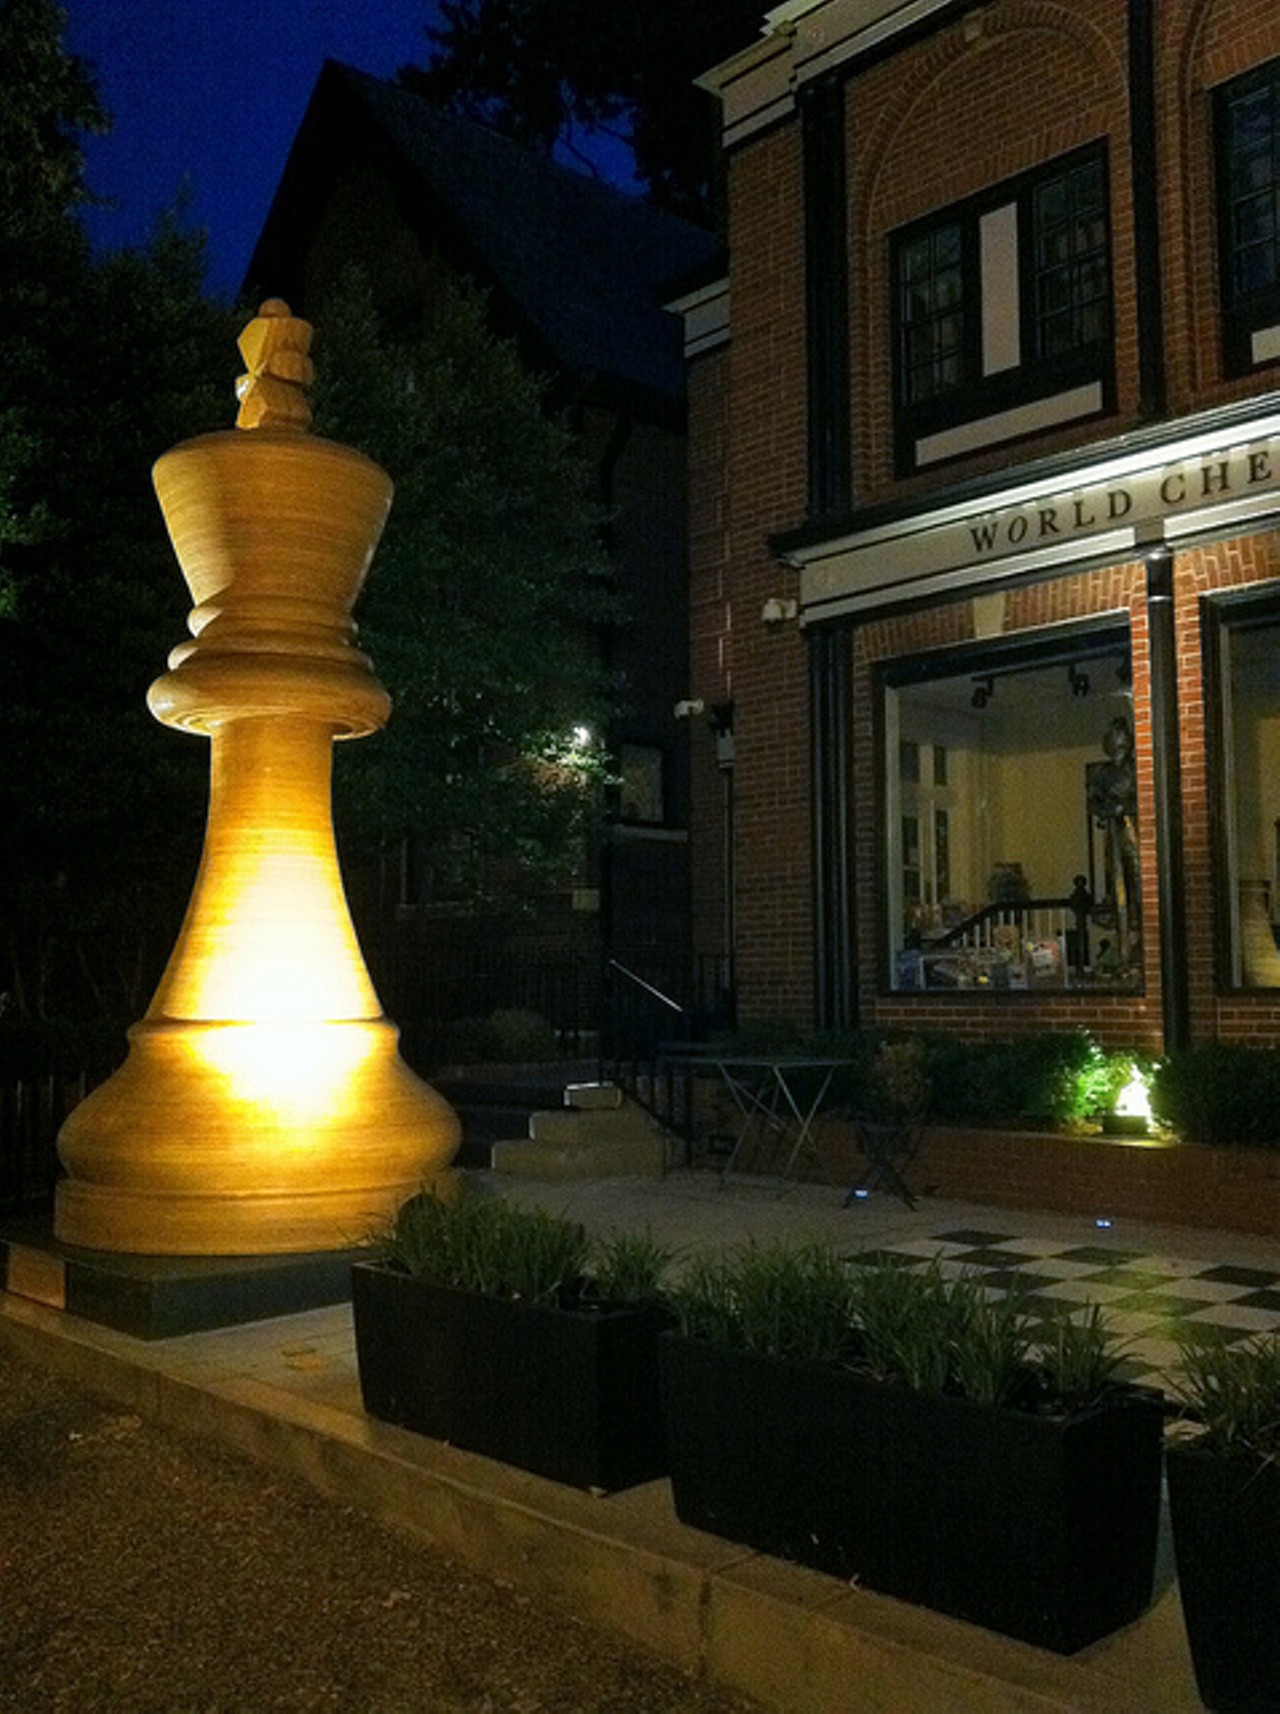 The World Chess Hall of Fame. Photo courtesy Flickr/Stannate